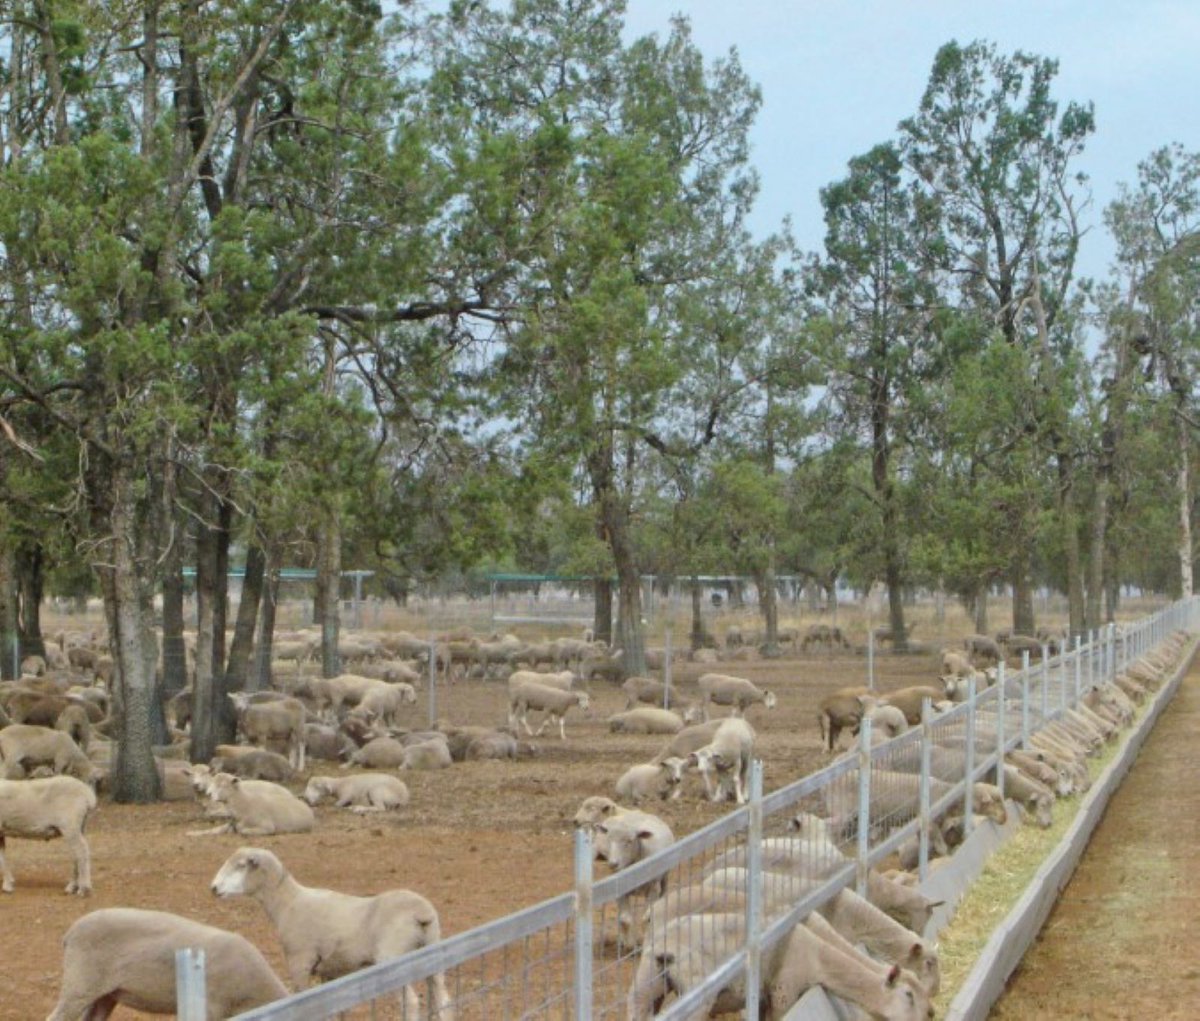 Pilot Project Stock Containment Feeding to Boost Business Performance and Resilience saw 2 successful workshops held, now the participants can access 1:1 support learn more sfs.org.au/article/stock-… @FRRR_Oz @VicHub_Drought